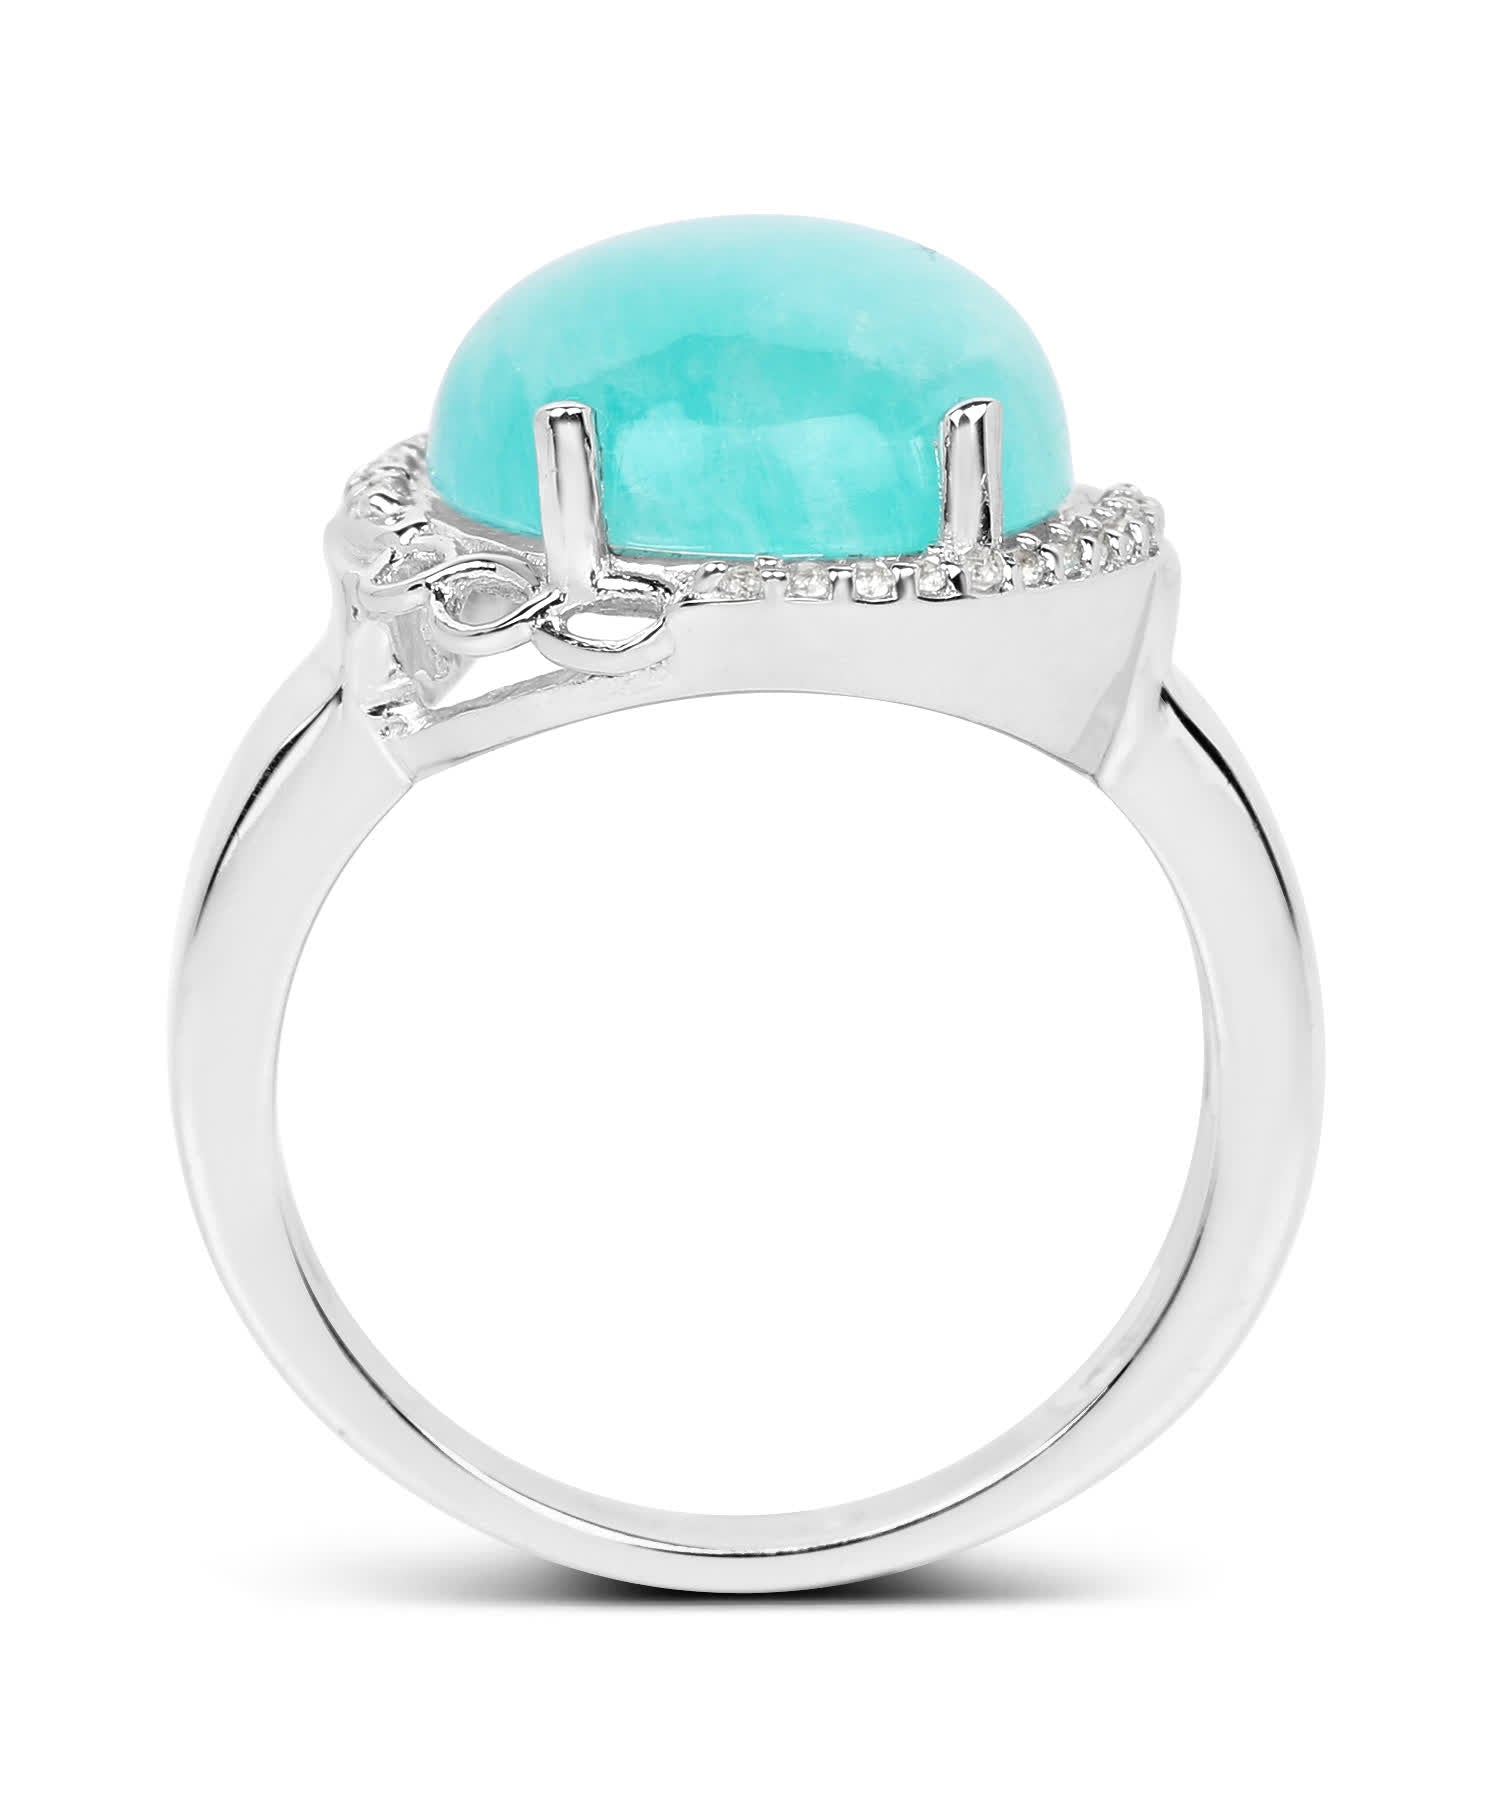 Olivia Leone 7.86ctw Natural Amazonite and Topaz Rhodium Plated 925 Sterling Silver Designer Ring View 2